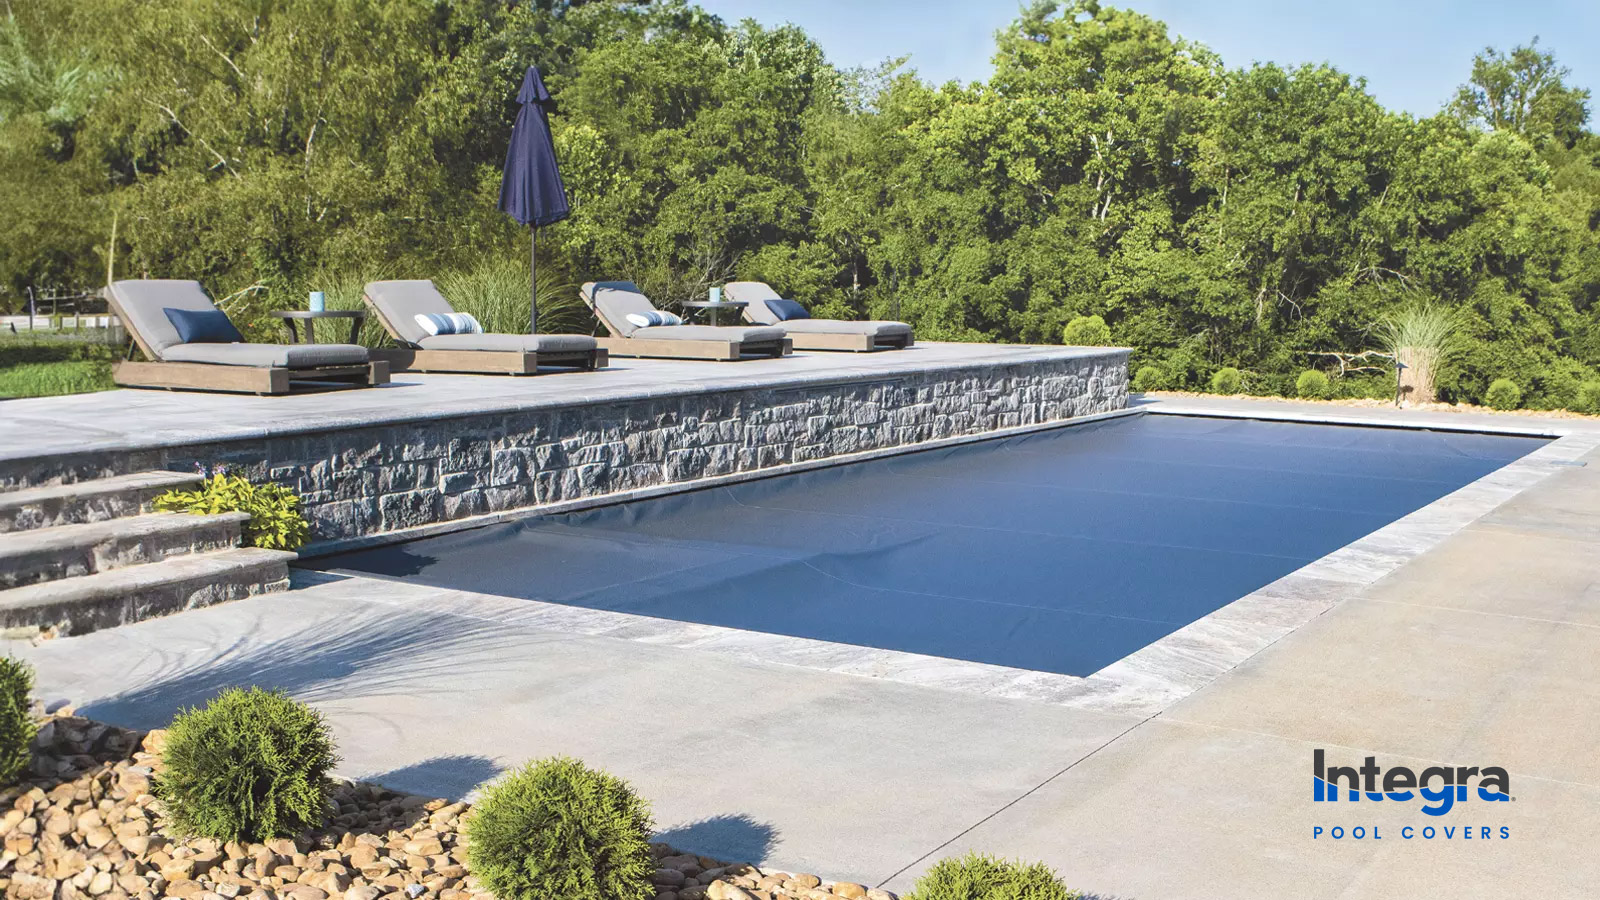 HighQuality Inground Pool Cover Protecting Pool from Debris and